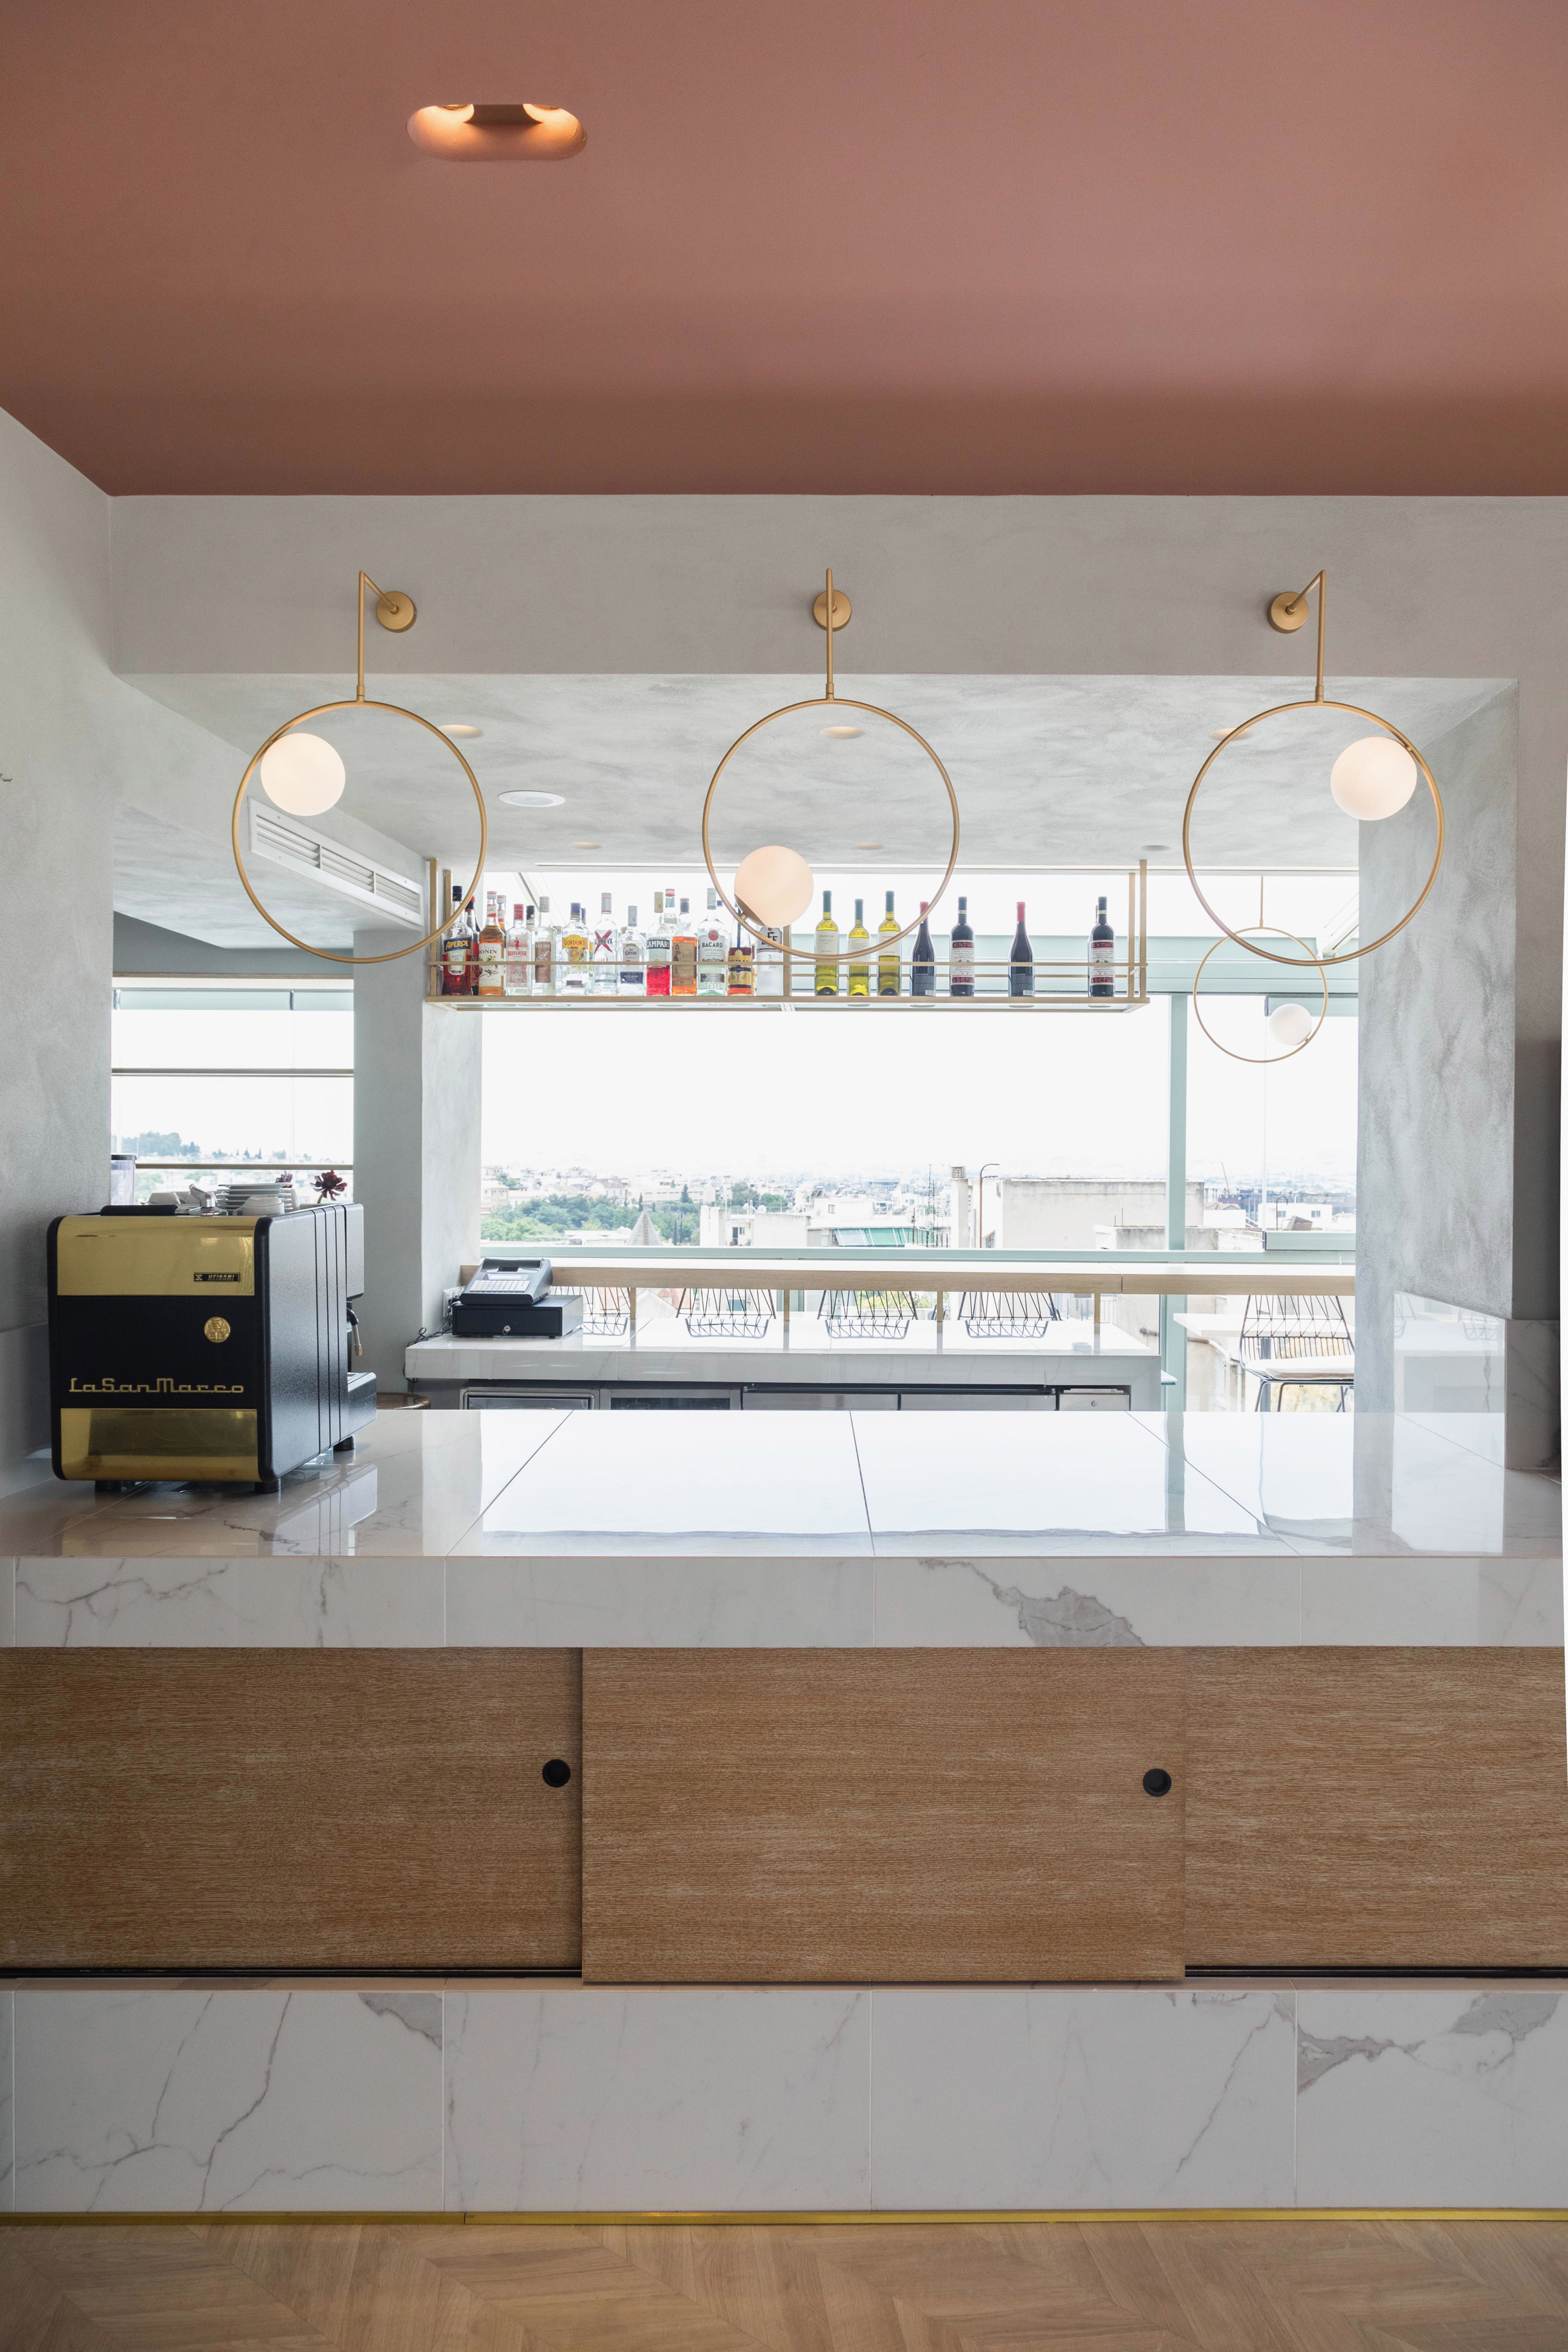 Fluo creates rooftop bar and breakfast room at Evripidis hotel in Athens